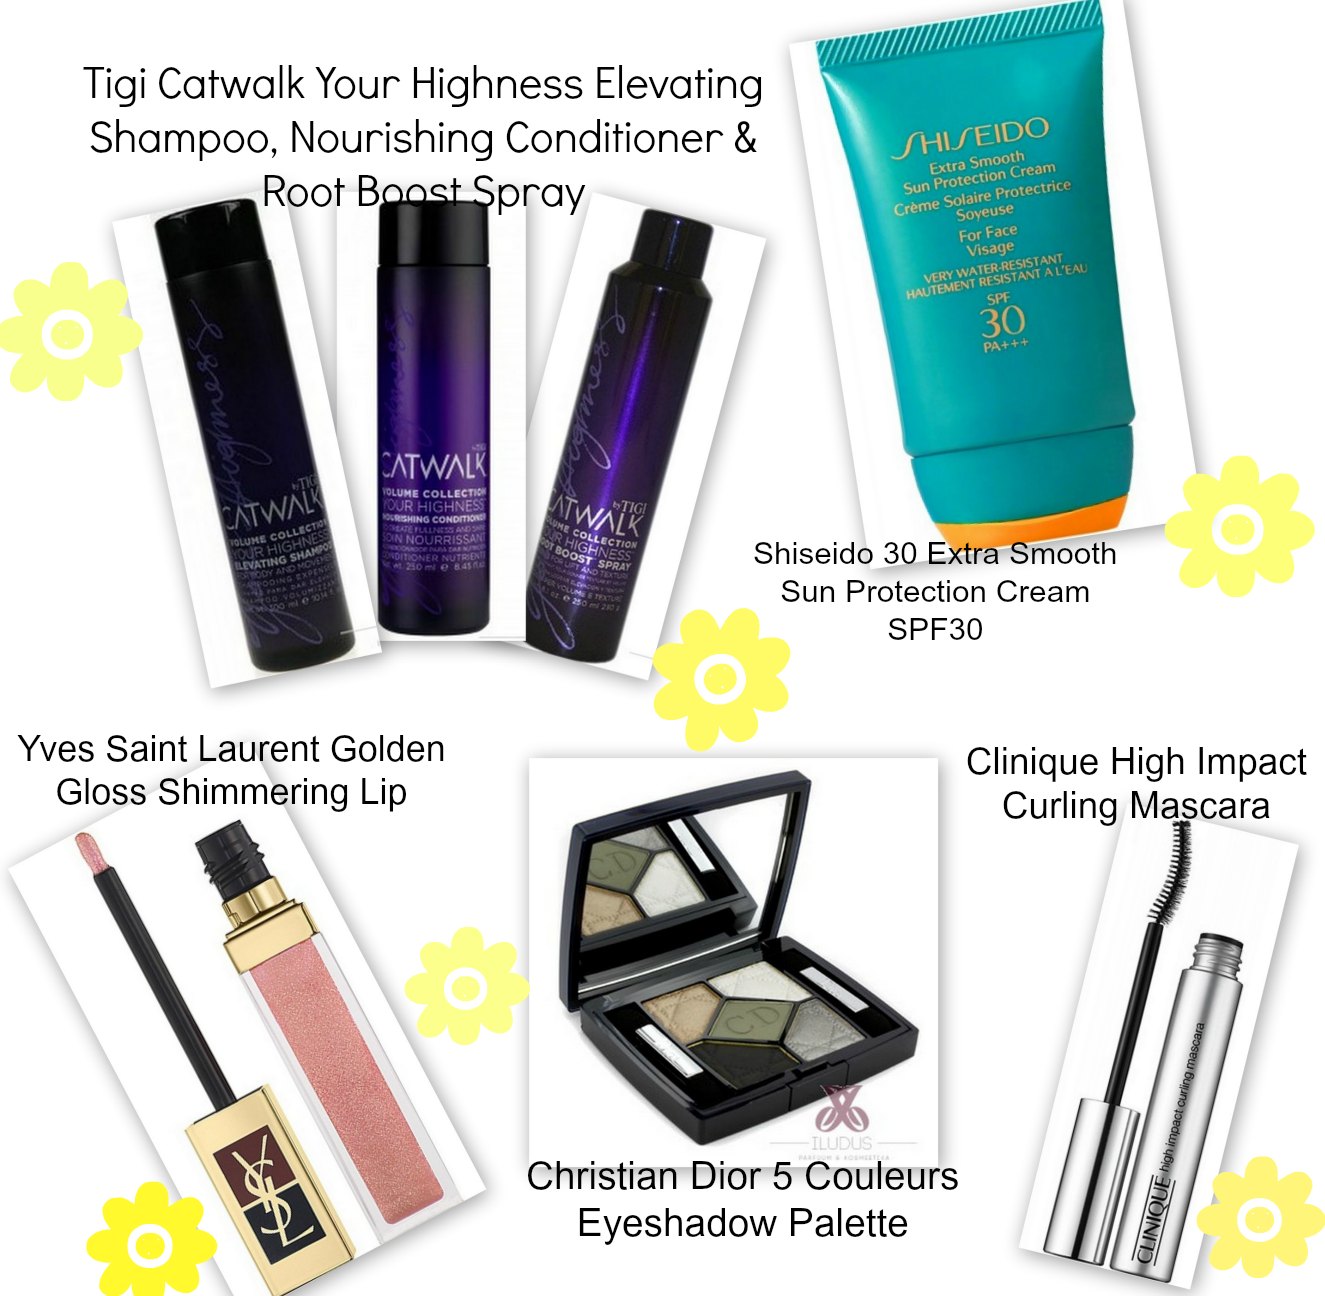 Tigi Catwalk Your Highness haircare products, Shiseido 30 Extra Smooth Sun Protection Cream SPF30, Yves Saint Laurent Golden Gloss Shimmer Lip, Christian Dior 5 Couleurs Eyeshadow Palette, Clinique High Impact Curling Mascara